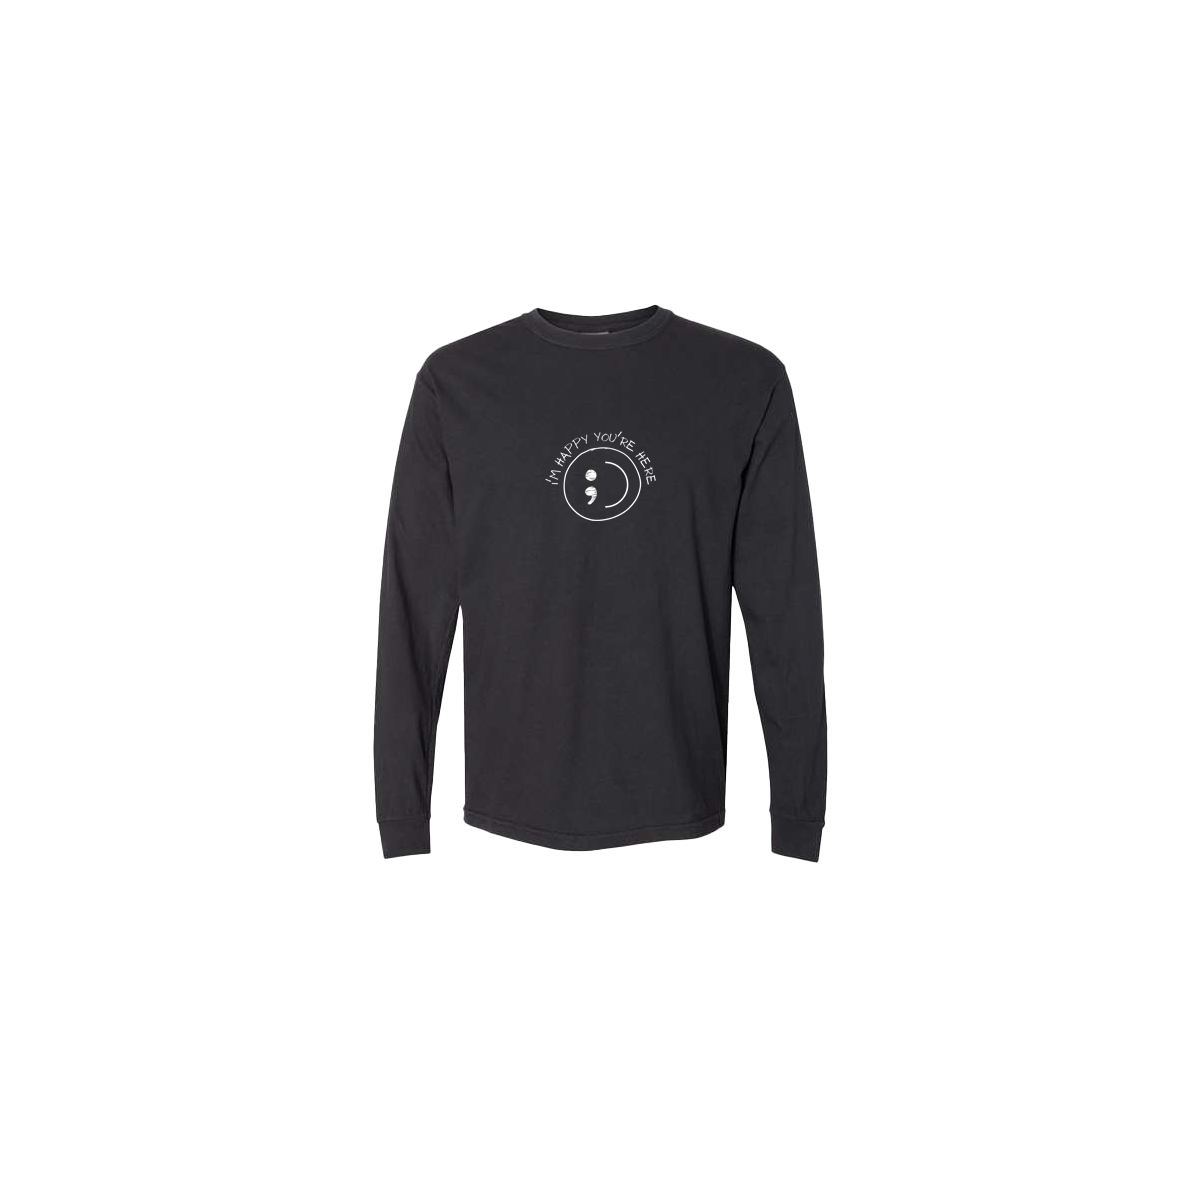 I'm Happy You're Here Embroidered Black Long Sleeve Tshirt - Mental Health Awareness Clothing